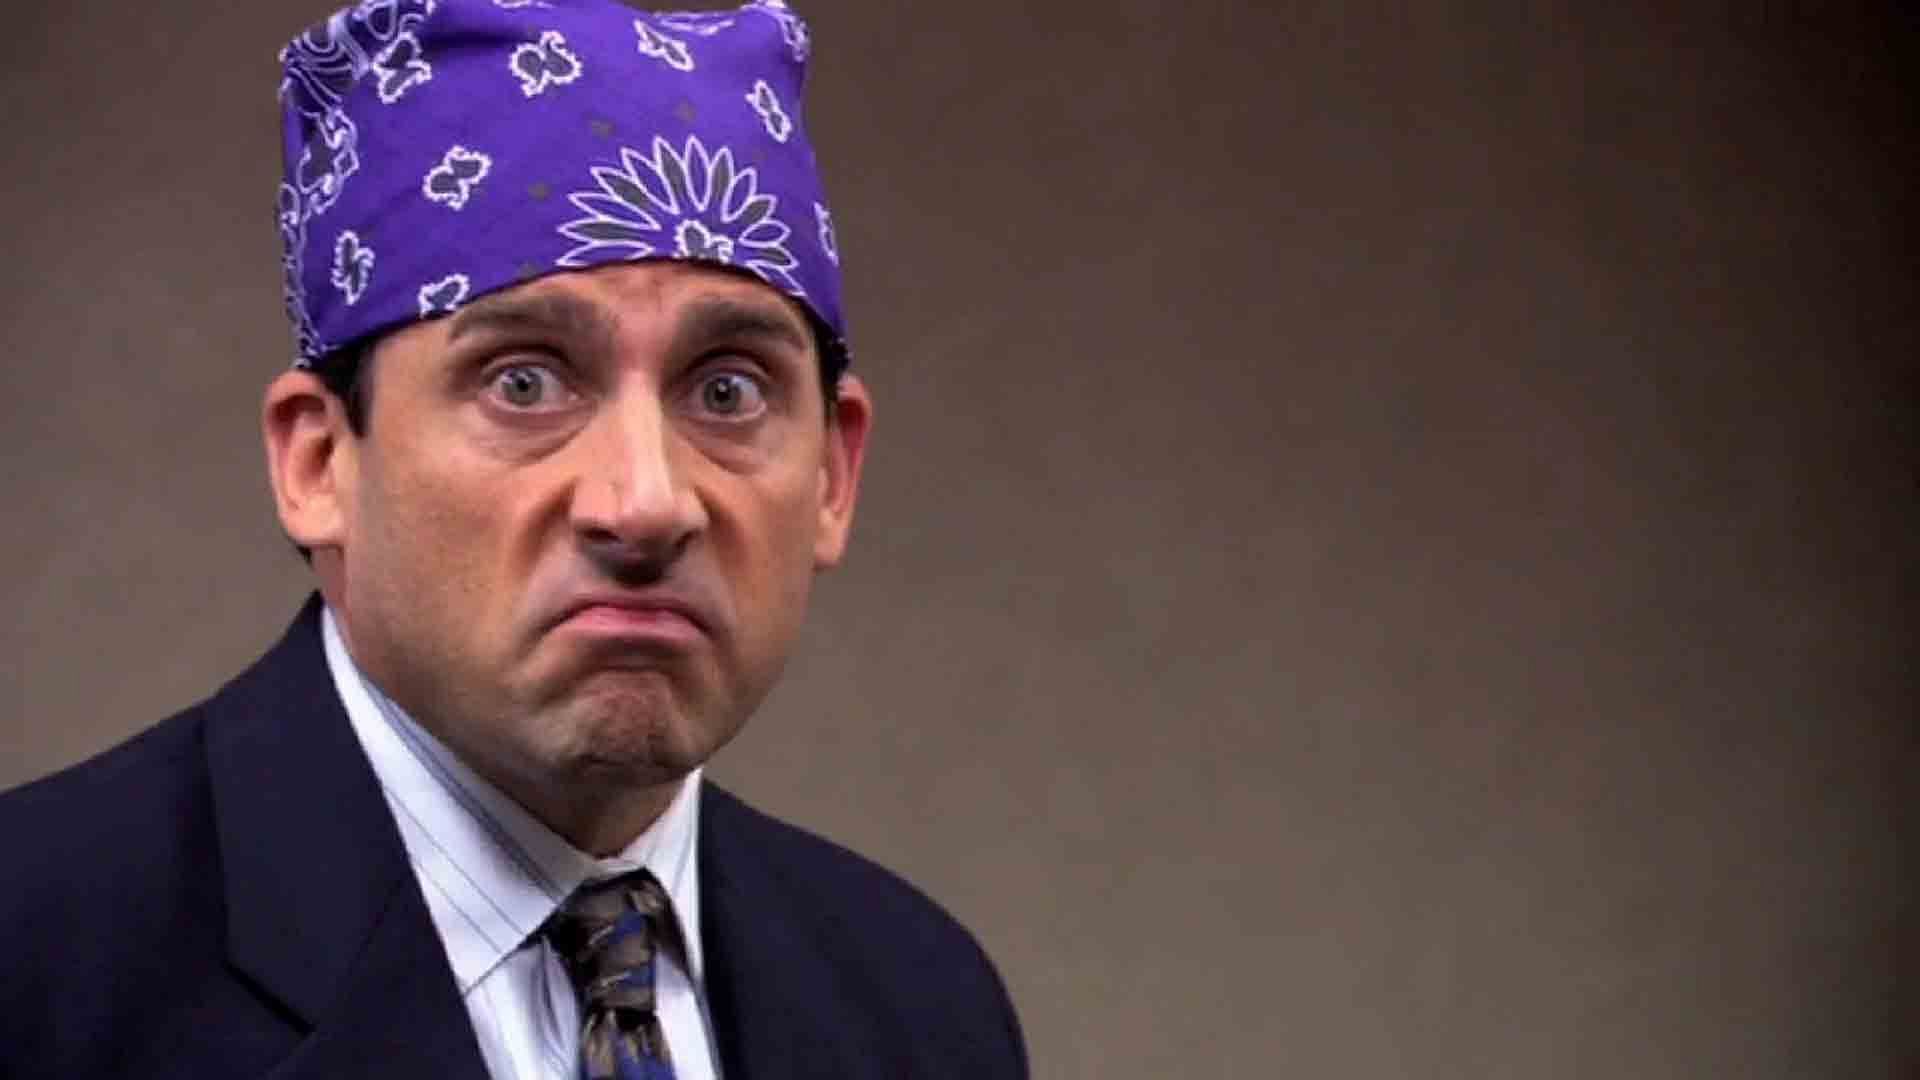 The Office: 5 times Michael Scott was totally relatable